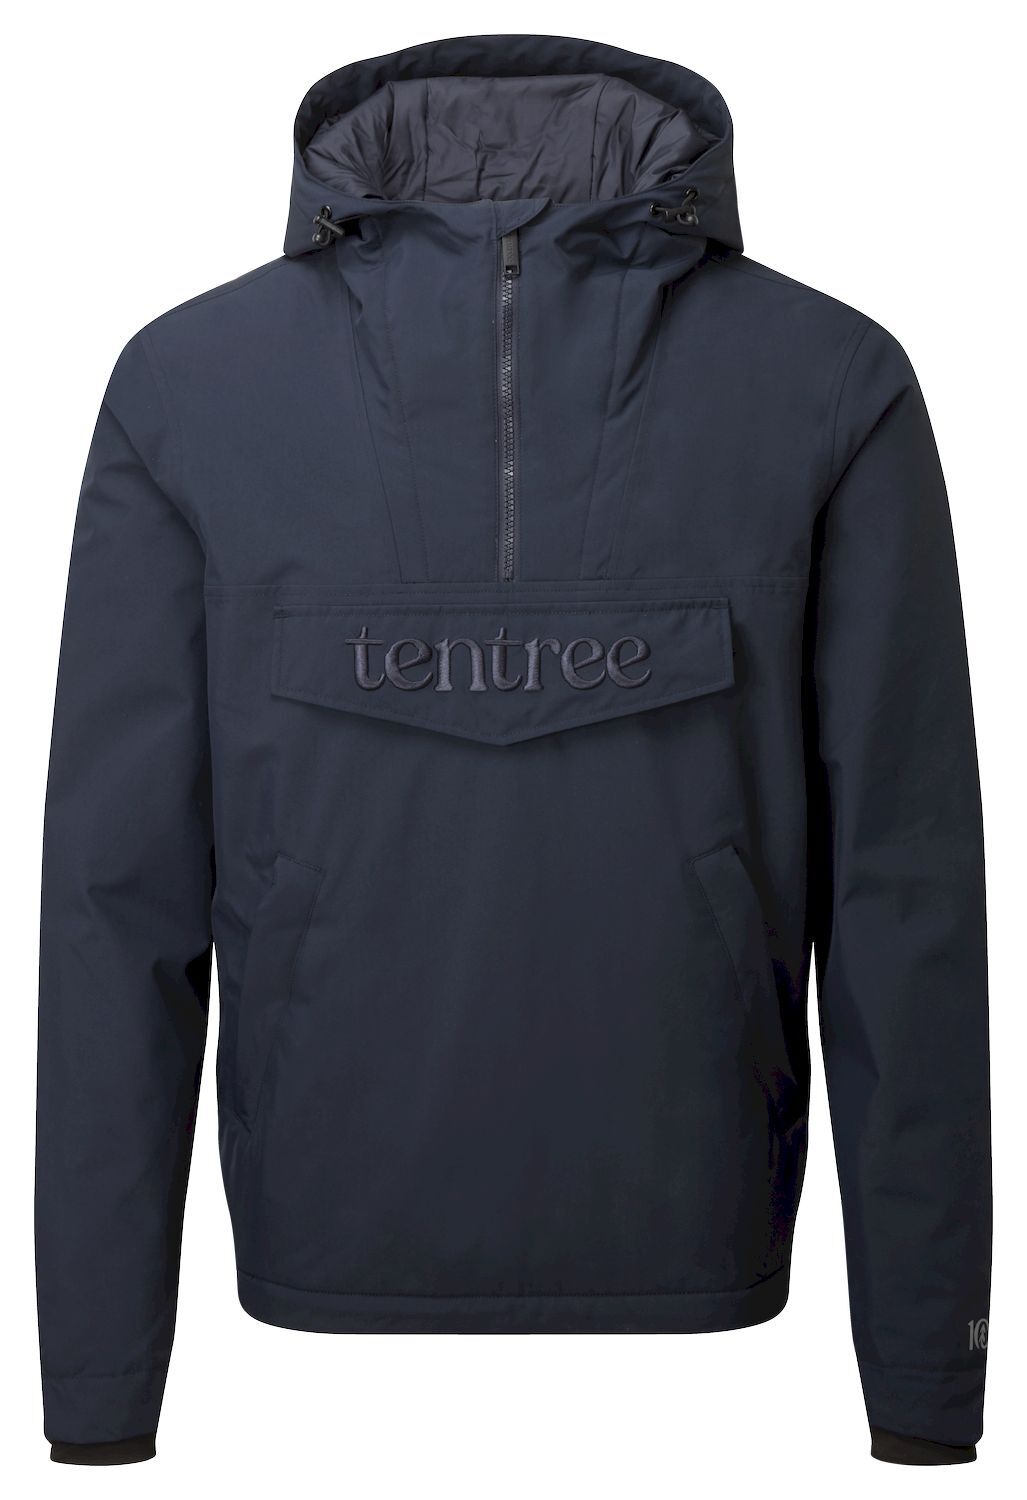 Tentree Cloud Shell Anorak - Synthetic jacket - Men's